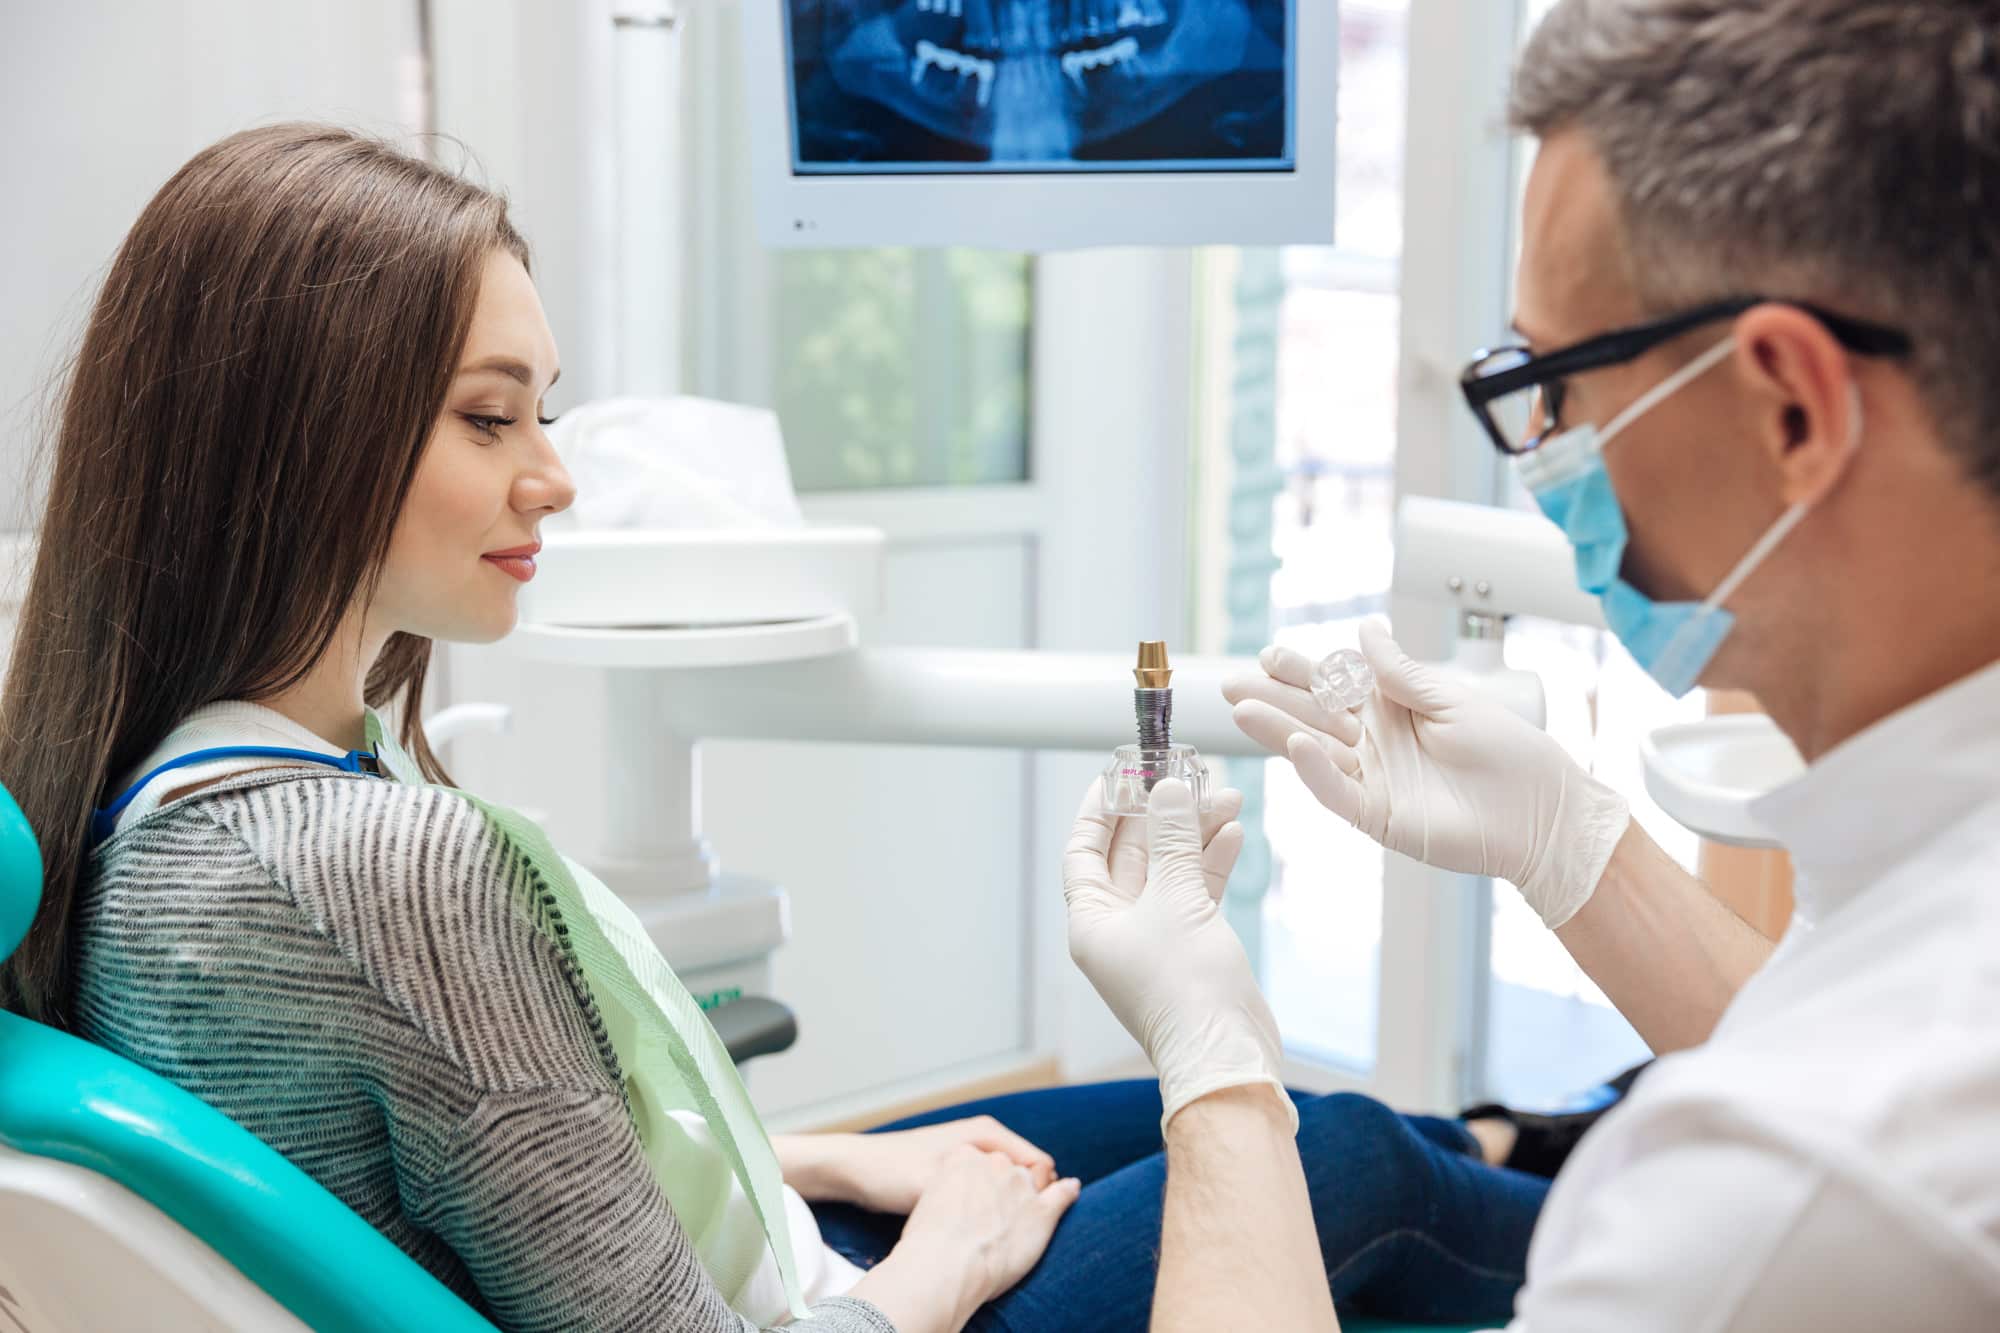 What to Expect at Your Dentist Appointment During COVID-19